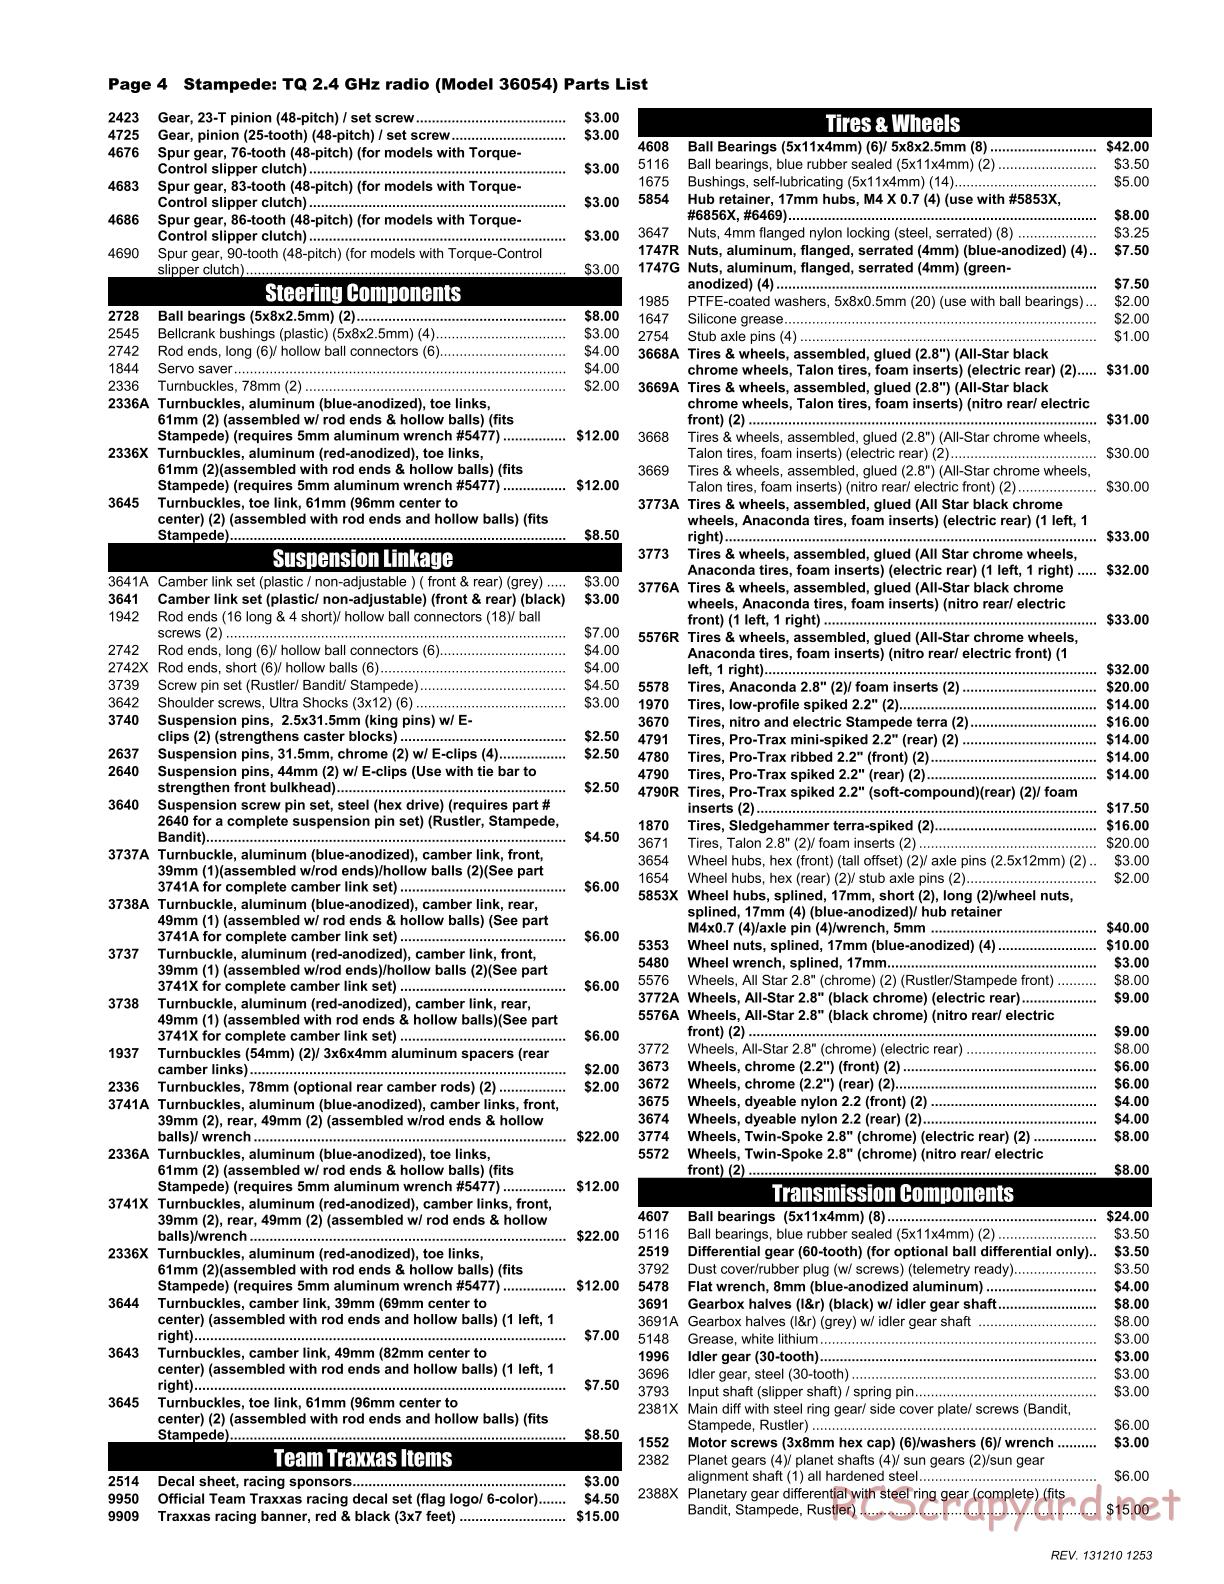 Traxxas - Stampede XL-5 - Parts List - Page 4